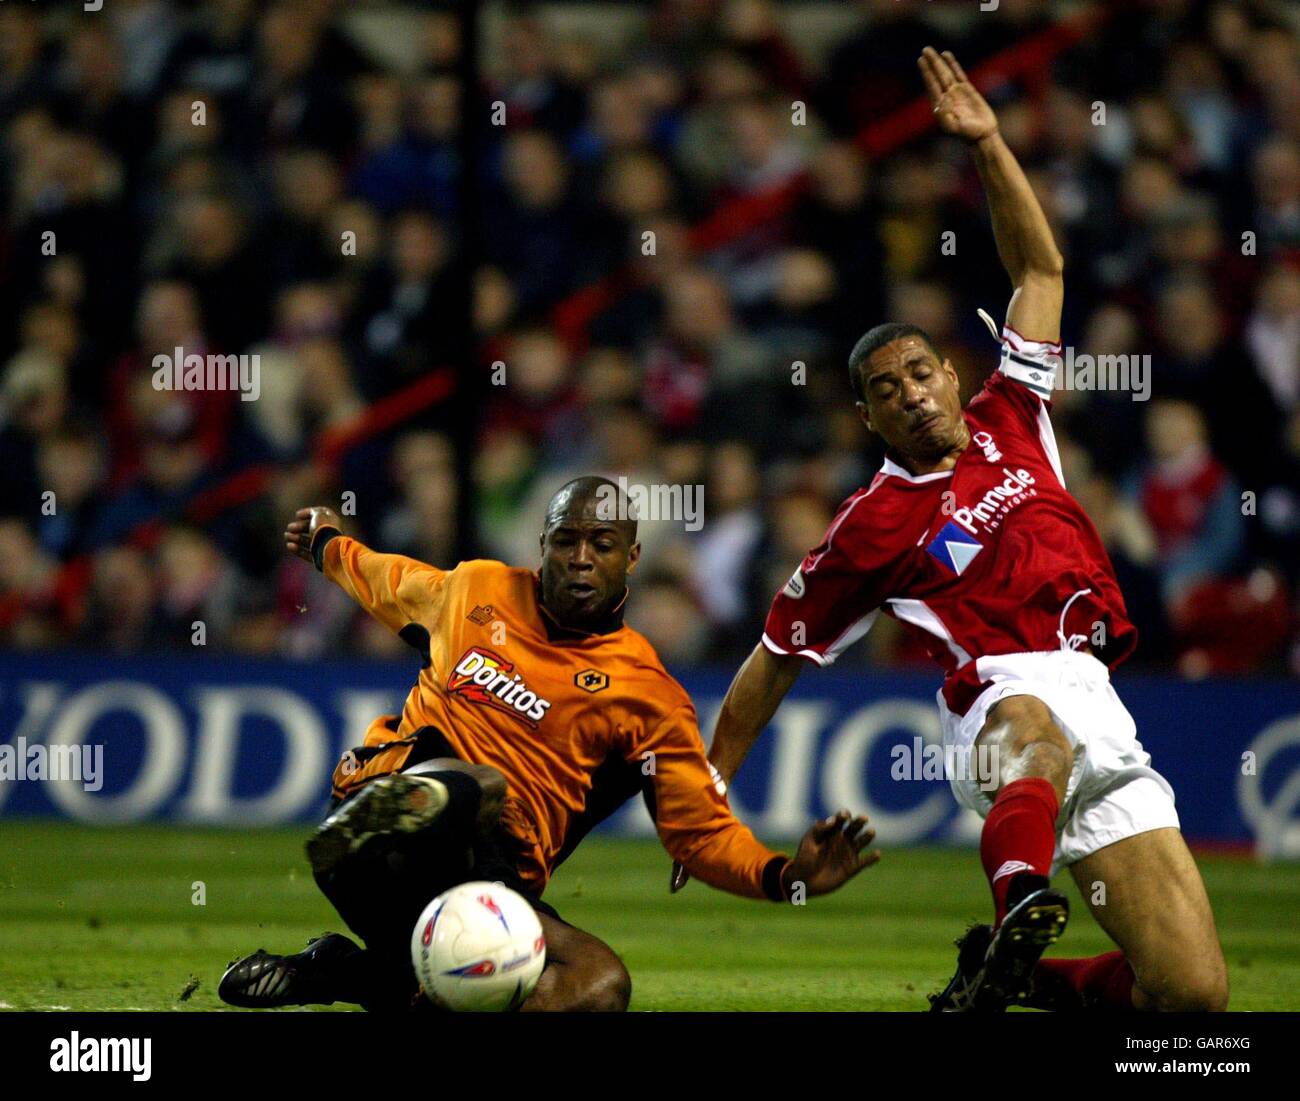 Nottingham Forest's Des Walker (r) and Wolverhampton Wanderers' Nathan Blake battle for the ball Stock Photo